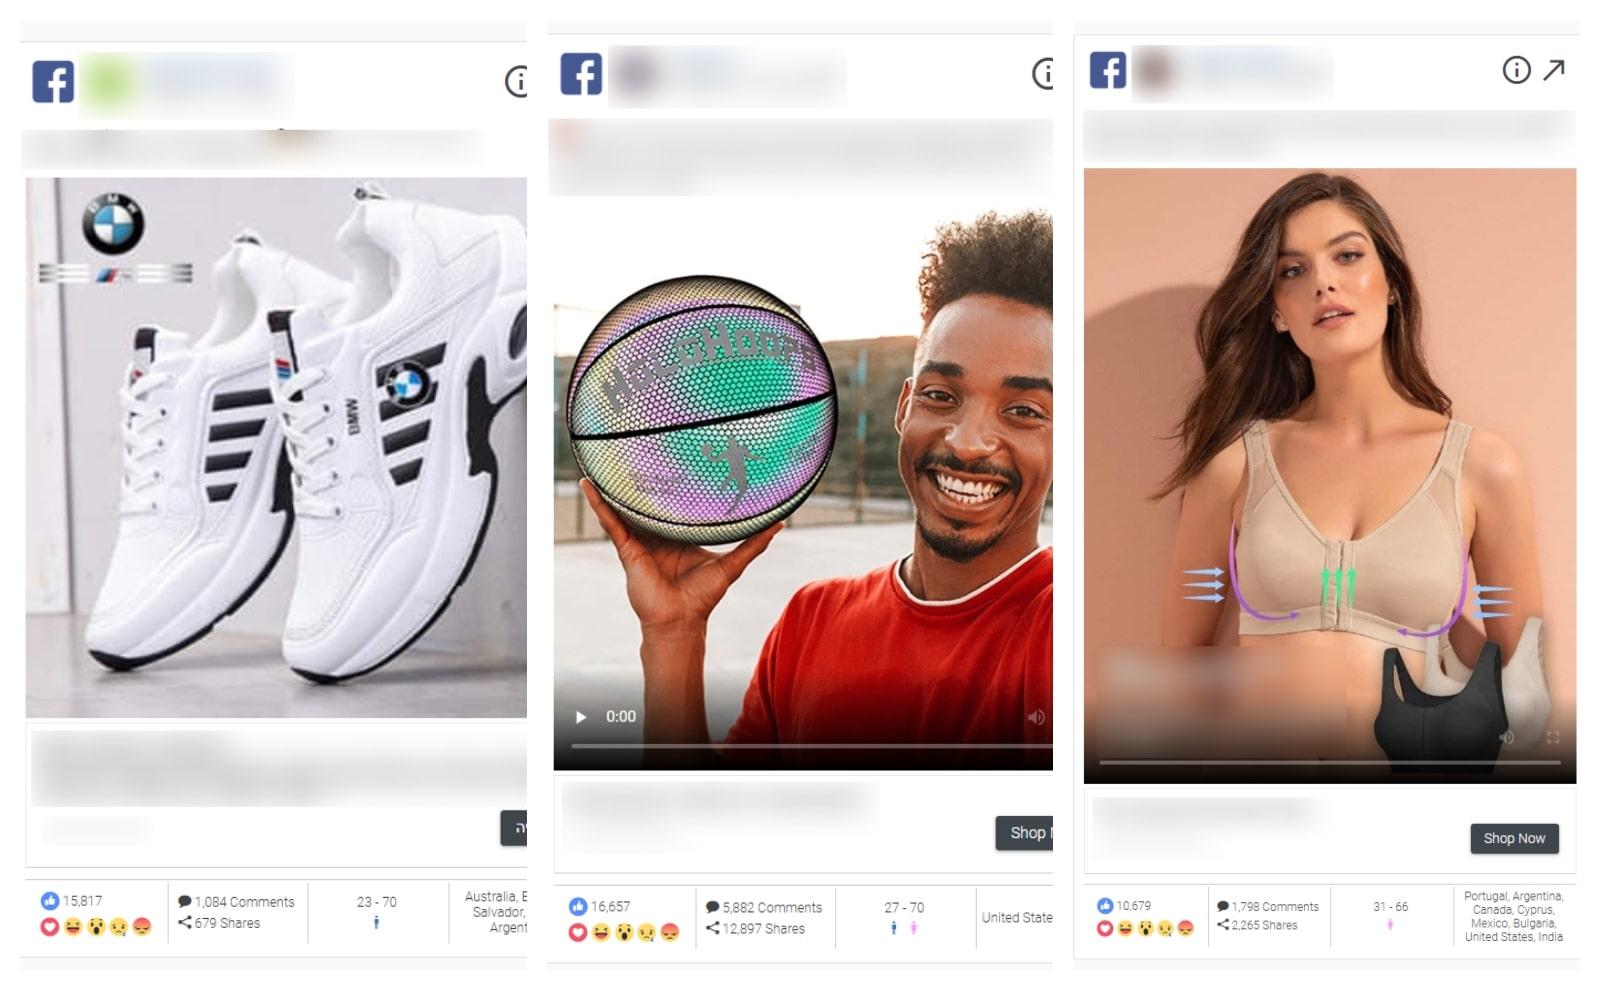 Examples of dropshipping ads on Facebook advertising sneakers, a basketball and a sports top